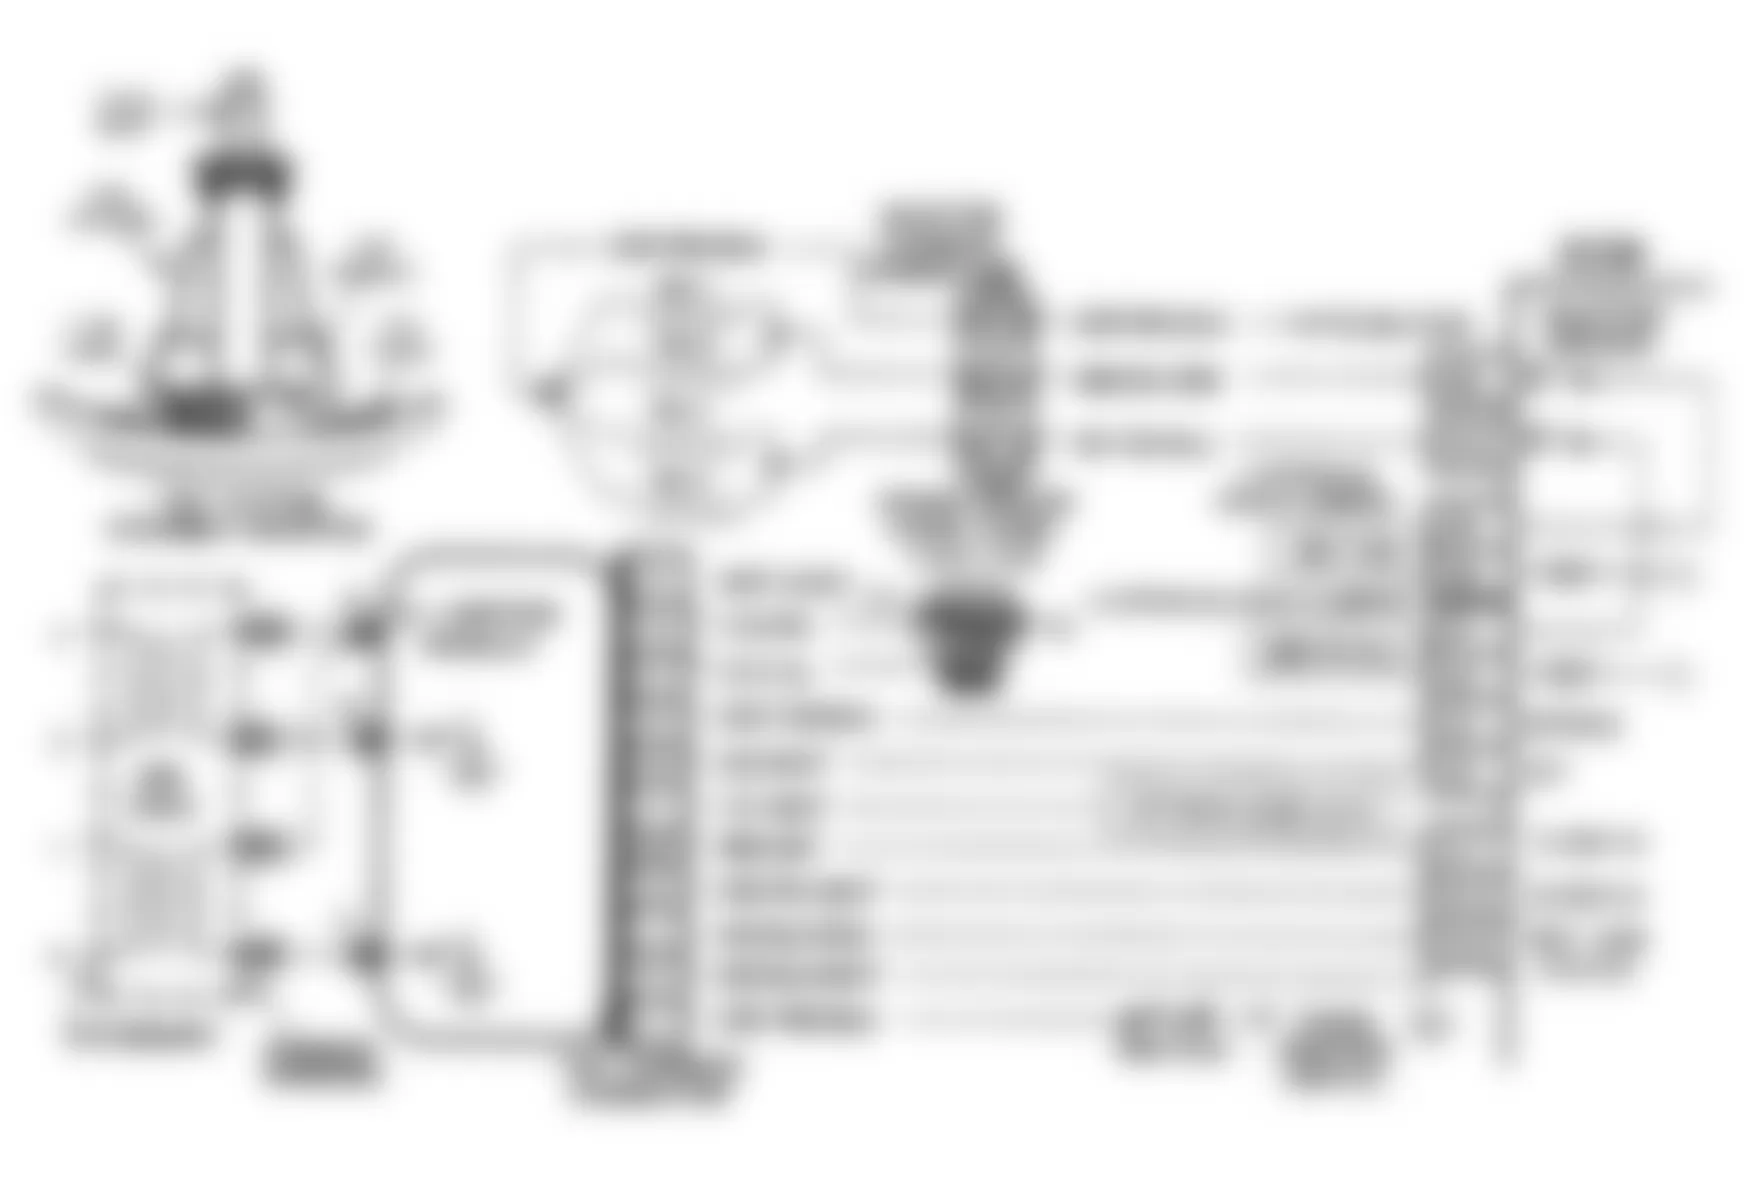 Buick Skylark 1991 - Component Locations -  Code 41, Schematic, W Body, 1X Reference Circuit